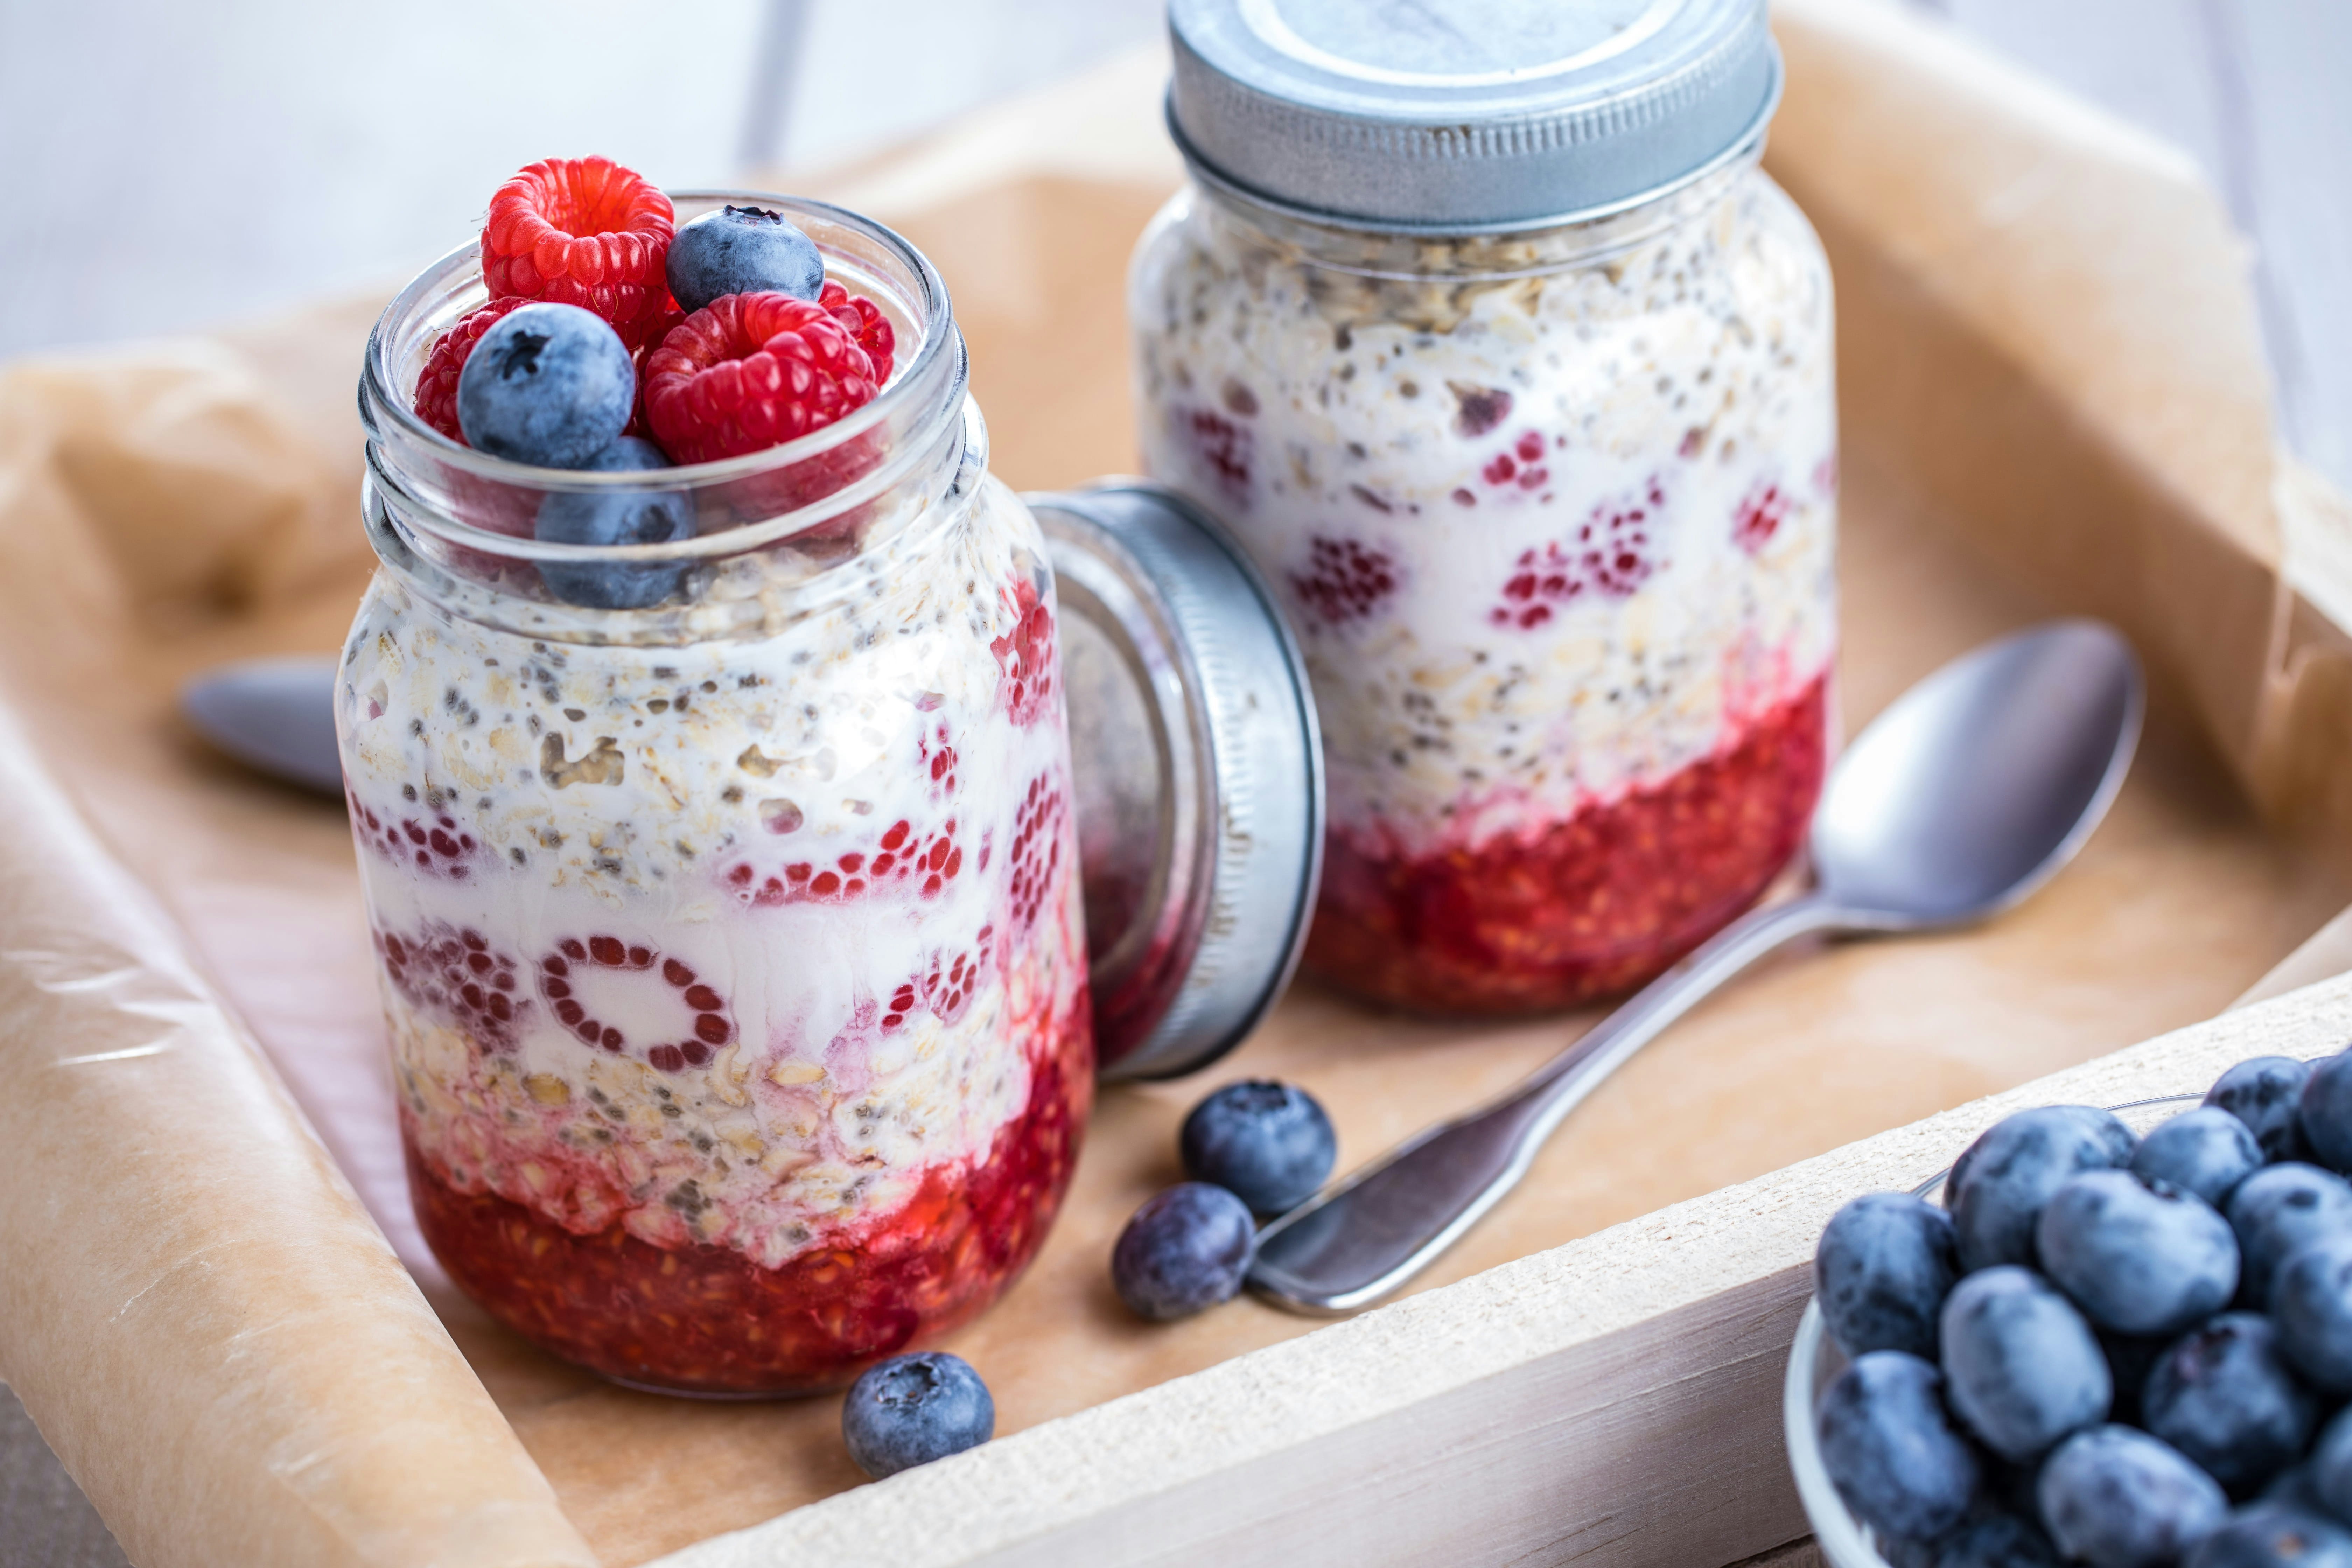 Overnight oats with Driscoll's raspberries and blueberries in a mason jar